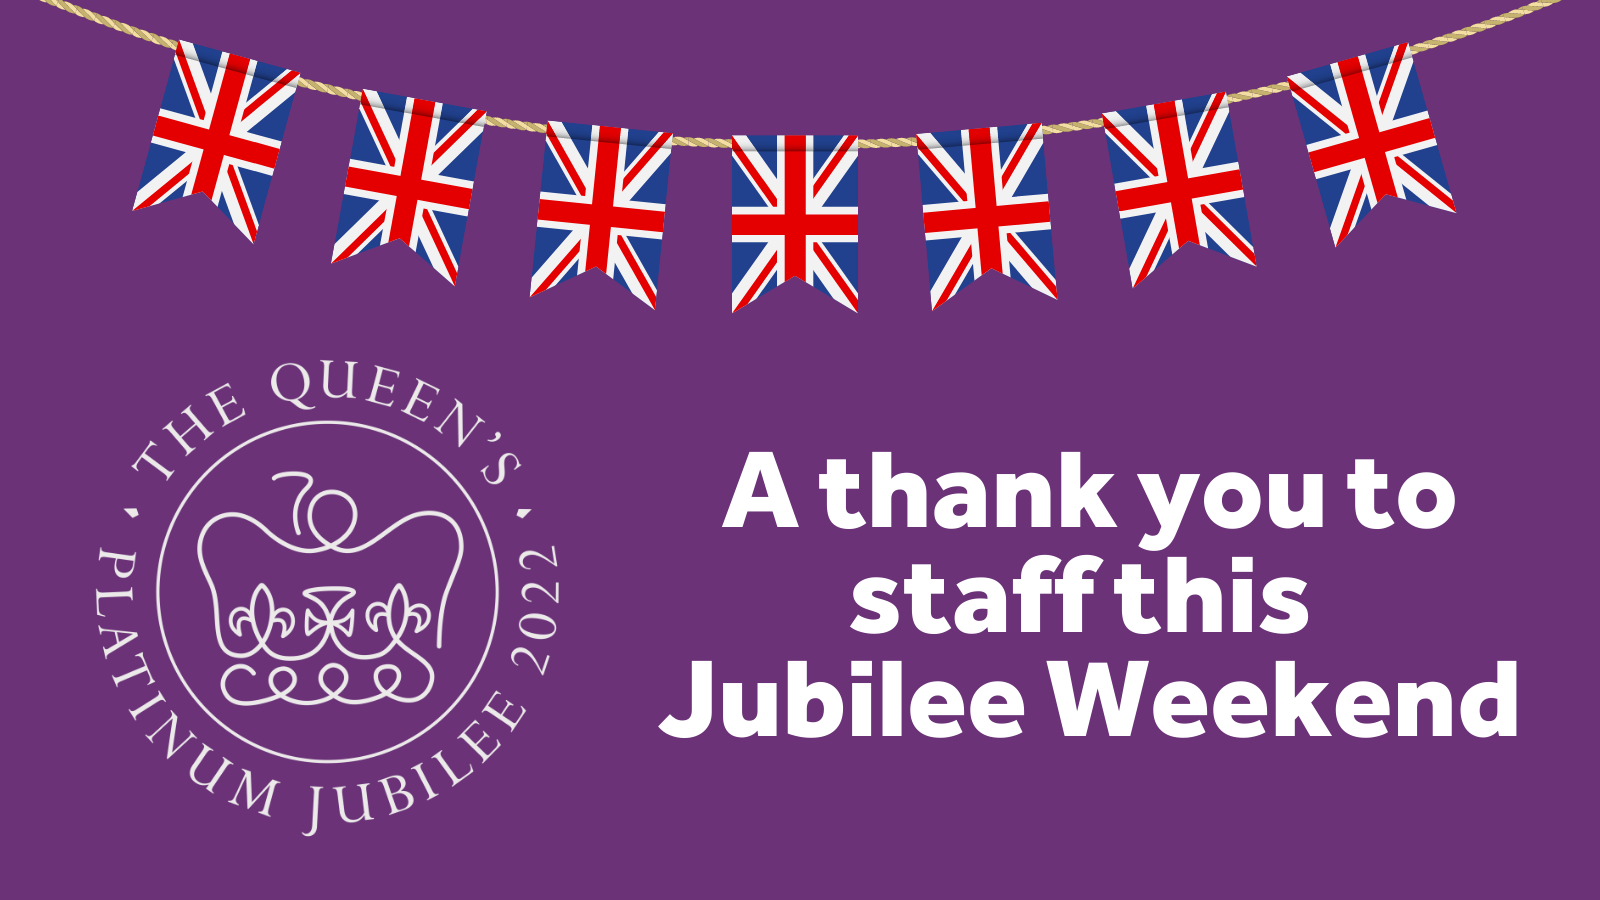 A thank you to staff this Jubilee Weekend